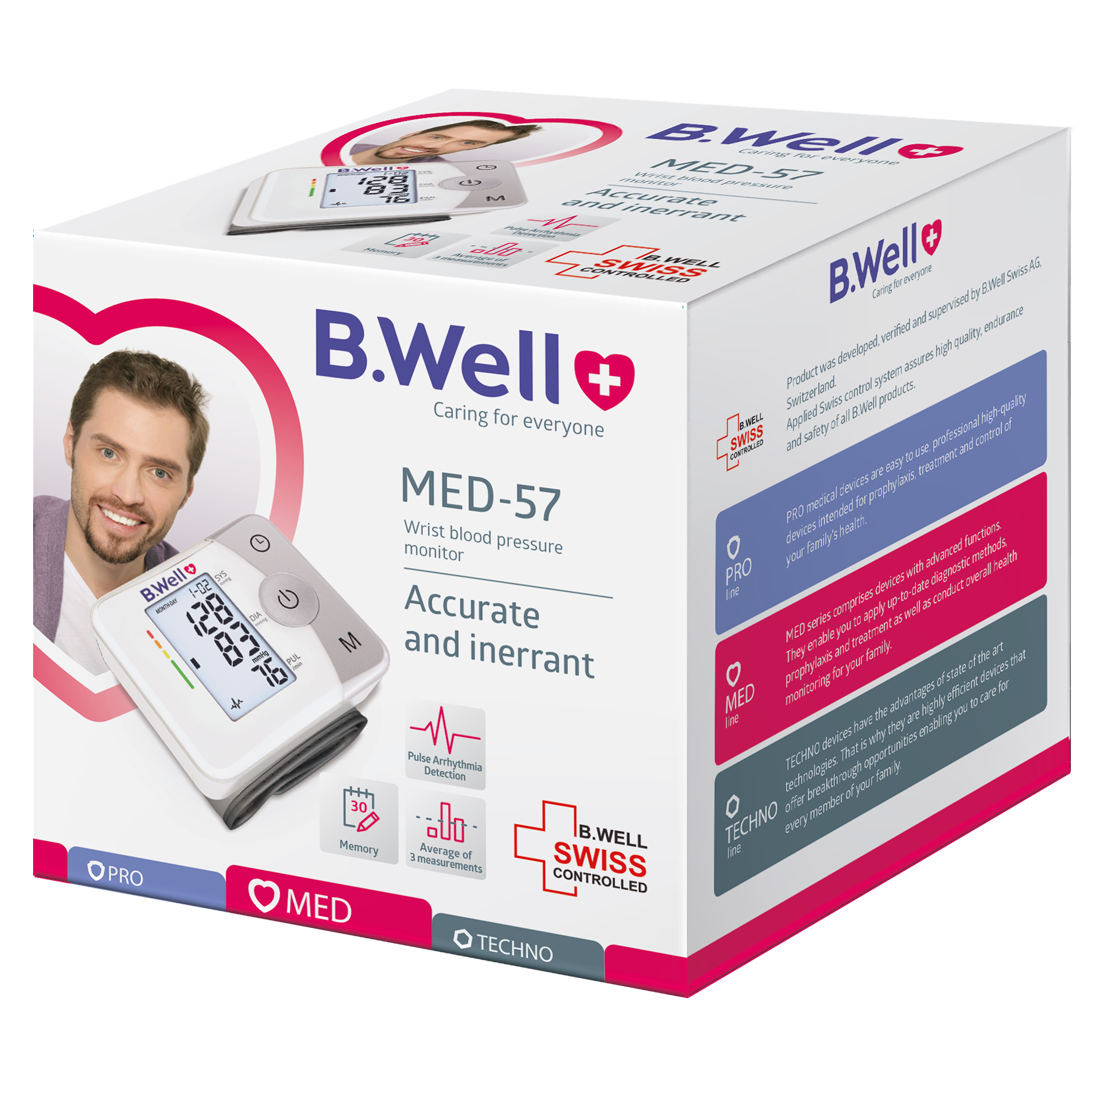 https://bwell-swiss.ch/wp-content/uploads/2018/12/MED-57_box.png